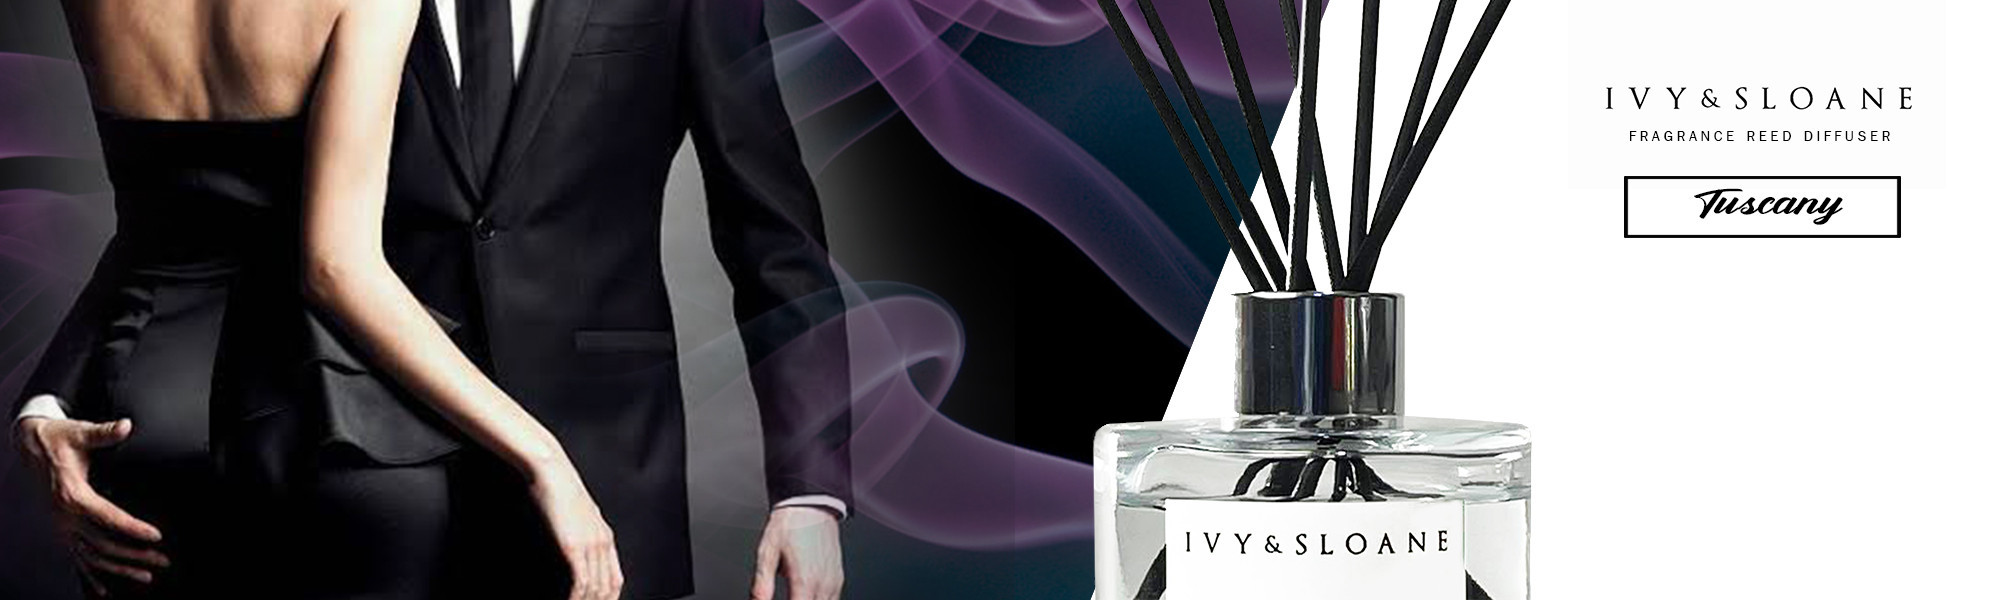 IVY Fragrance (@ivy.fragrance) • Instagram photos and videos